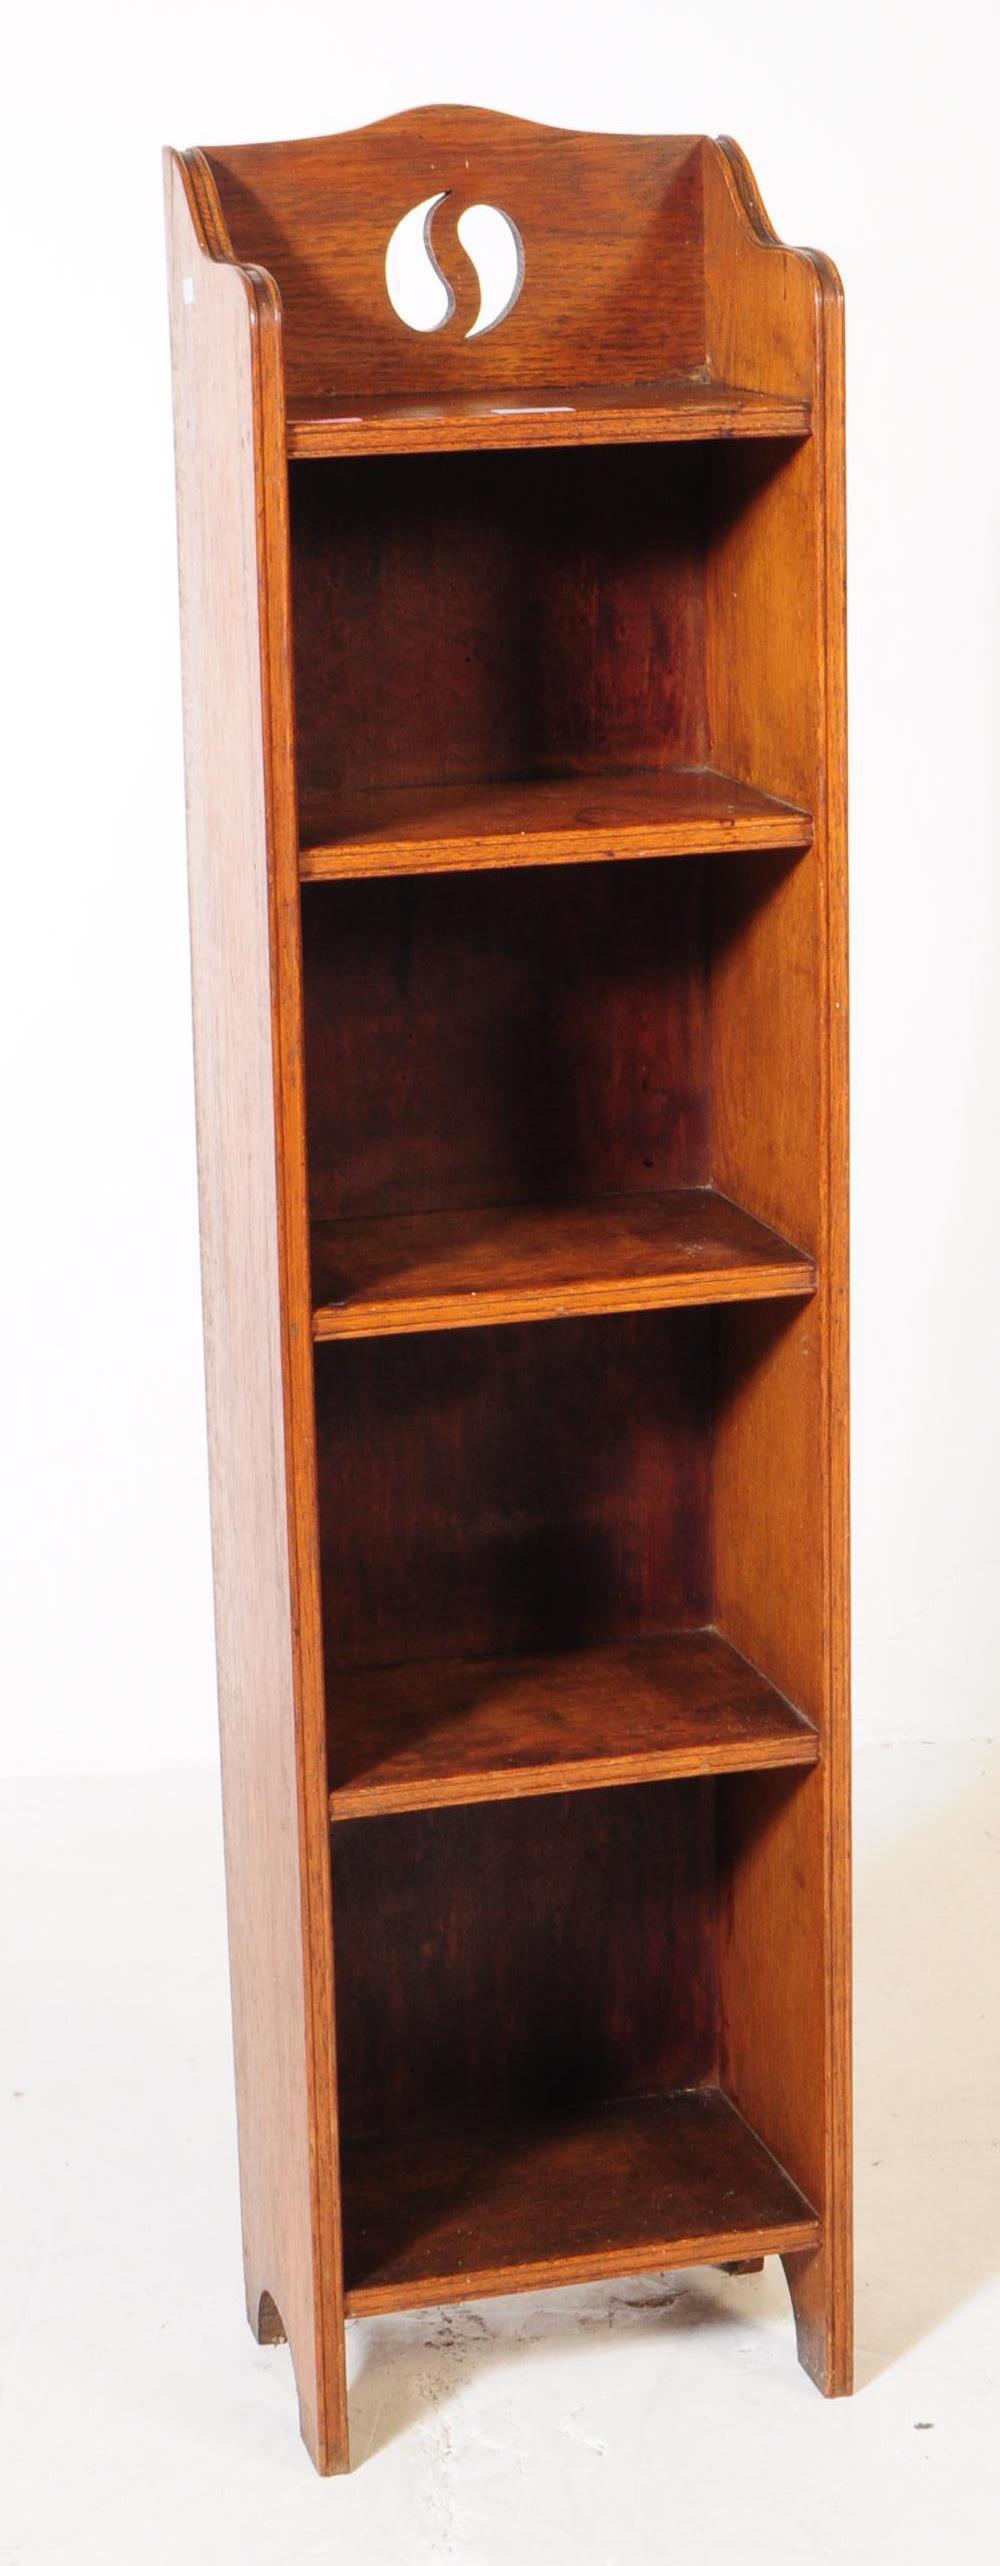 LIBERTY MANNER - MID CENTURY OAK WOOD LIBRARY BOOKCASE